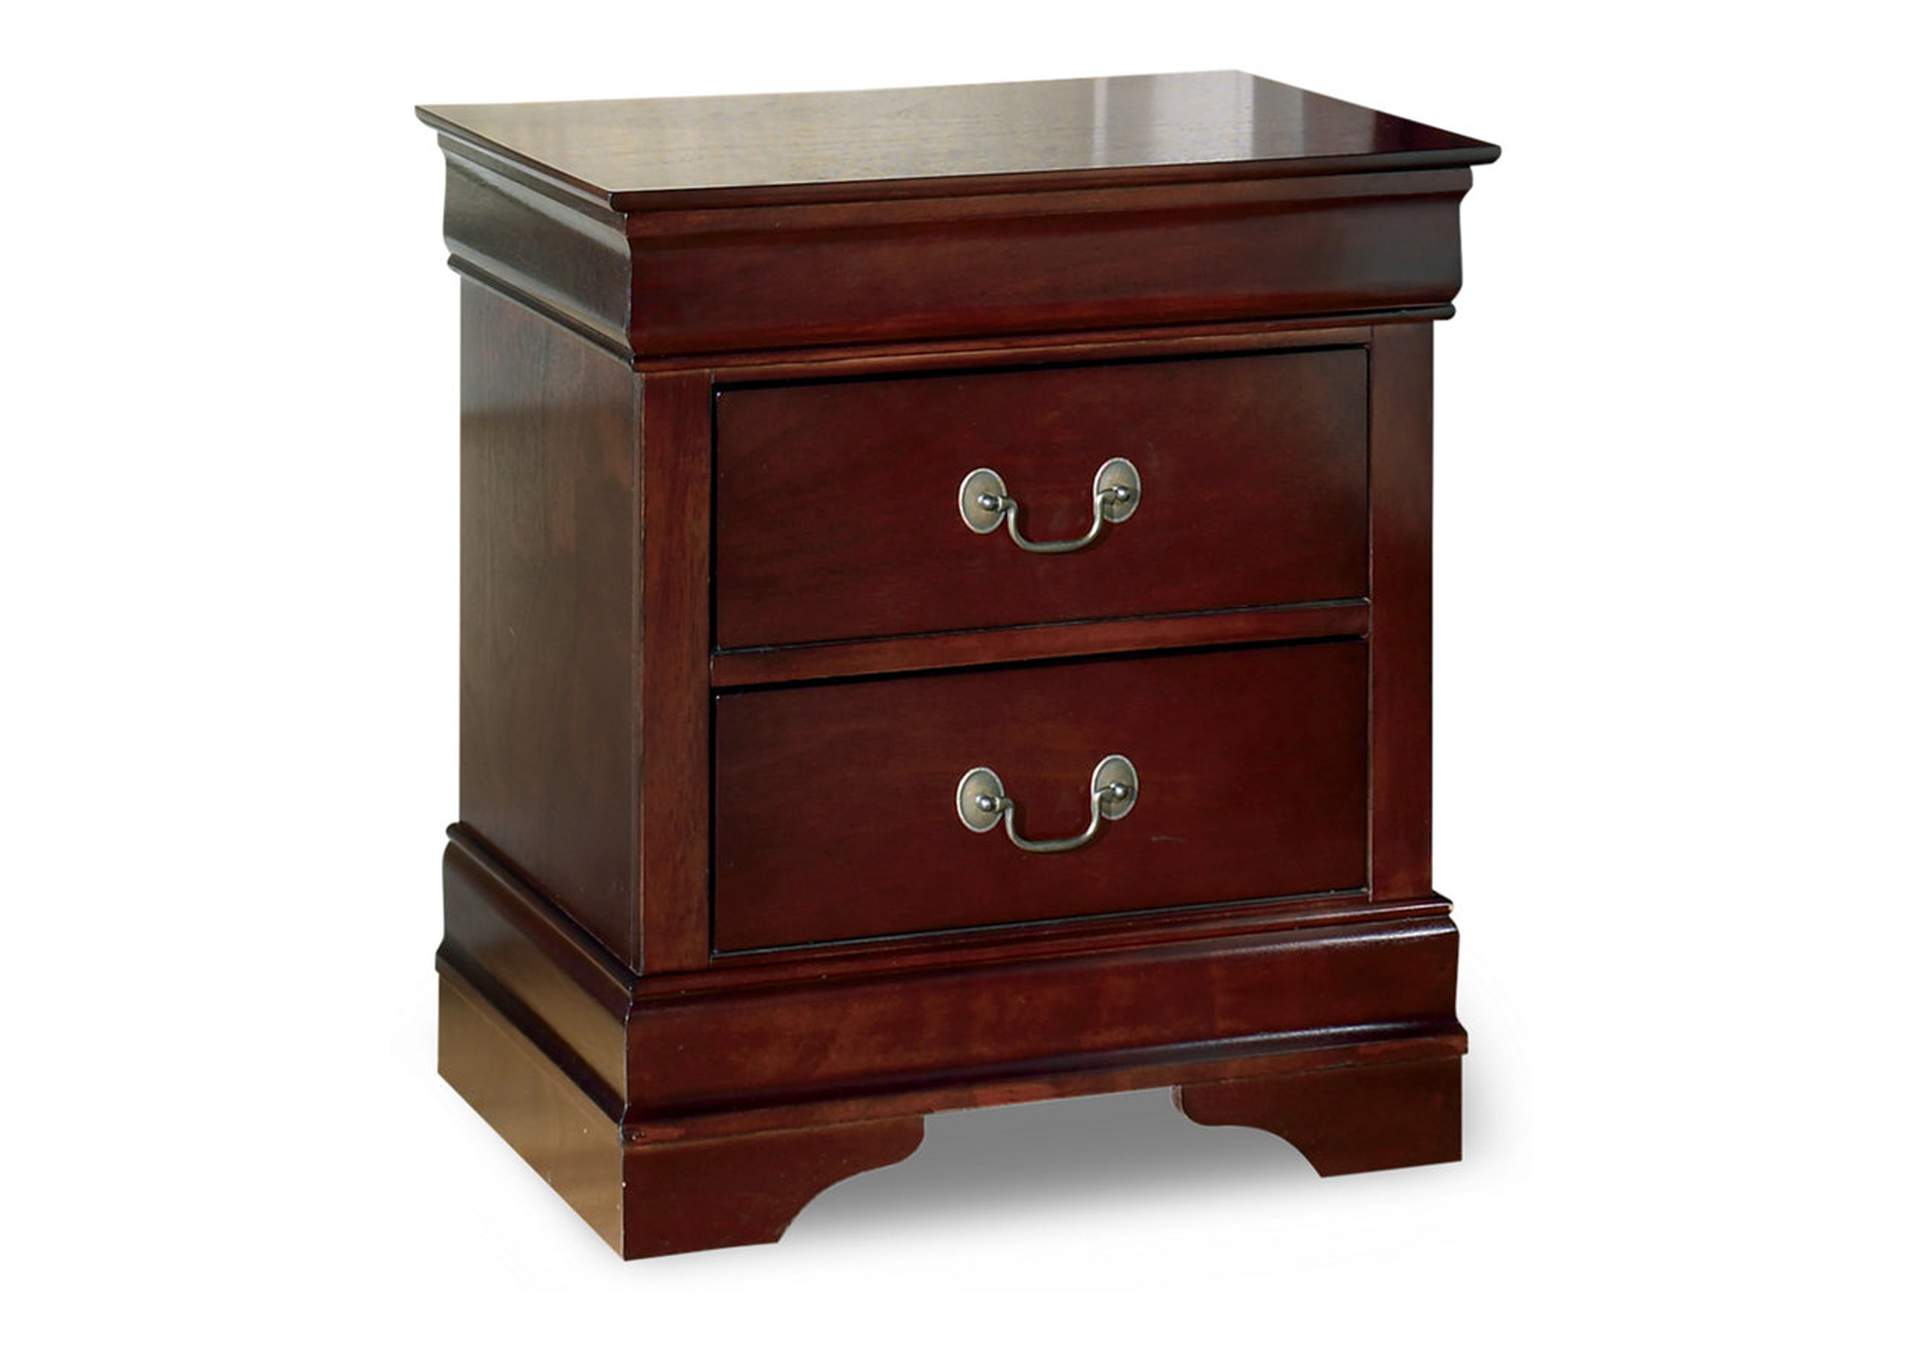 Alisdair King Sleigh Bed, Dresser, Mirror, Chest and 2 Nightstands,Signature Design By Ashley